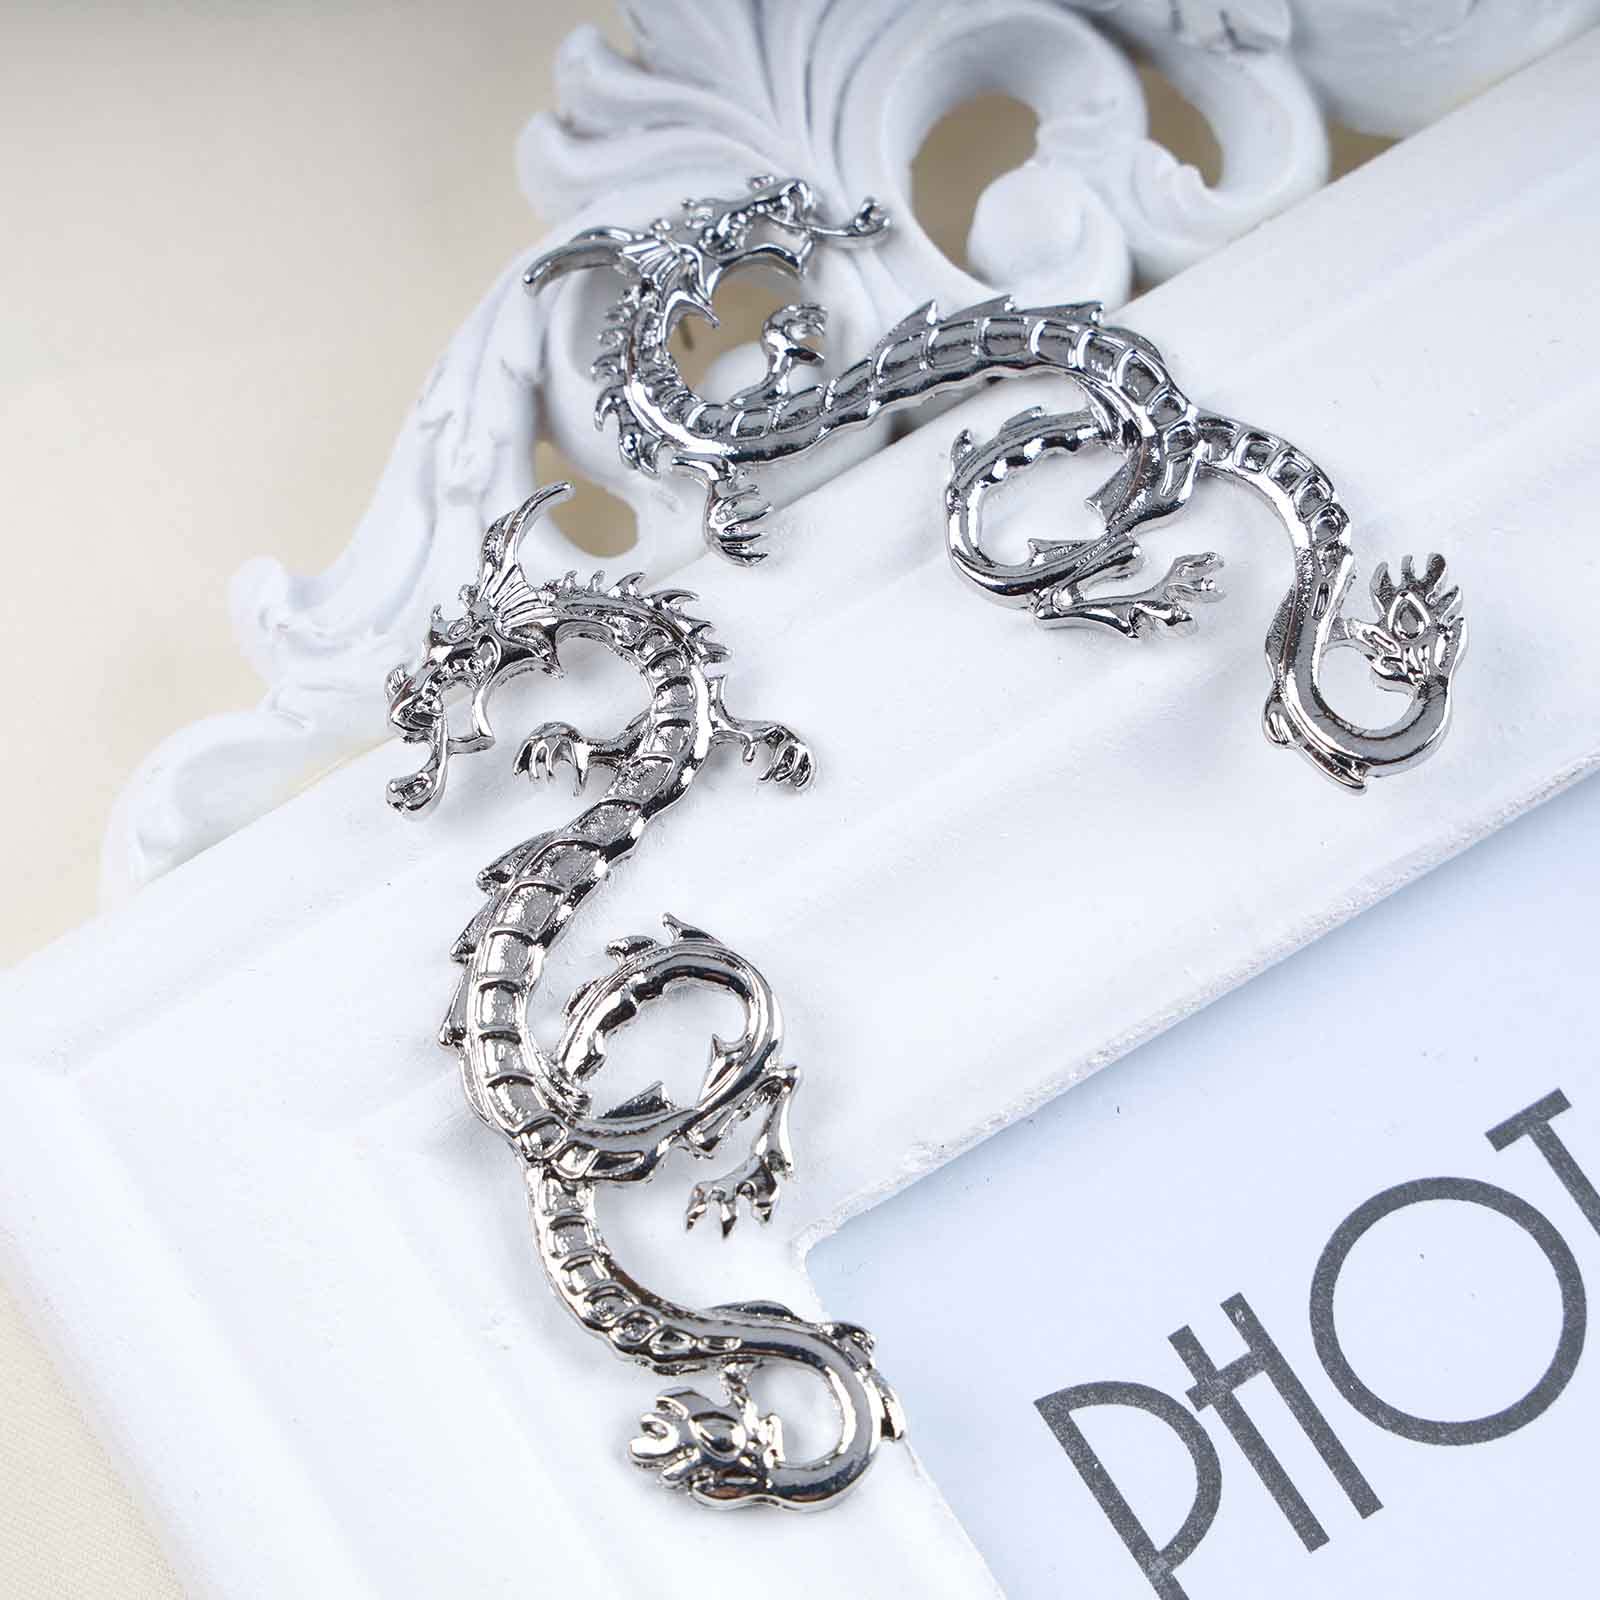 Andelaisi Punk Dragon Earrings Silver Dragon Drop Studs Earrings Gothic Dragon Exaggerated Earrings Vintage Ancient Dragon Animal Earrings Jewelry for Women Halloween Party Gifts